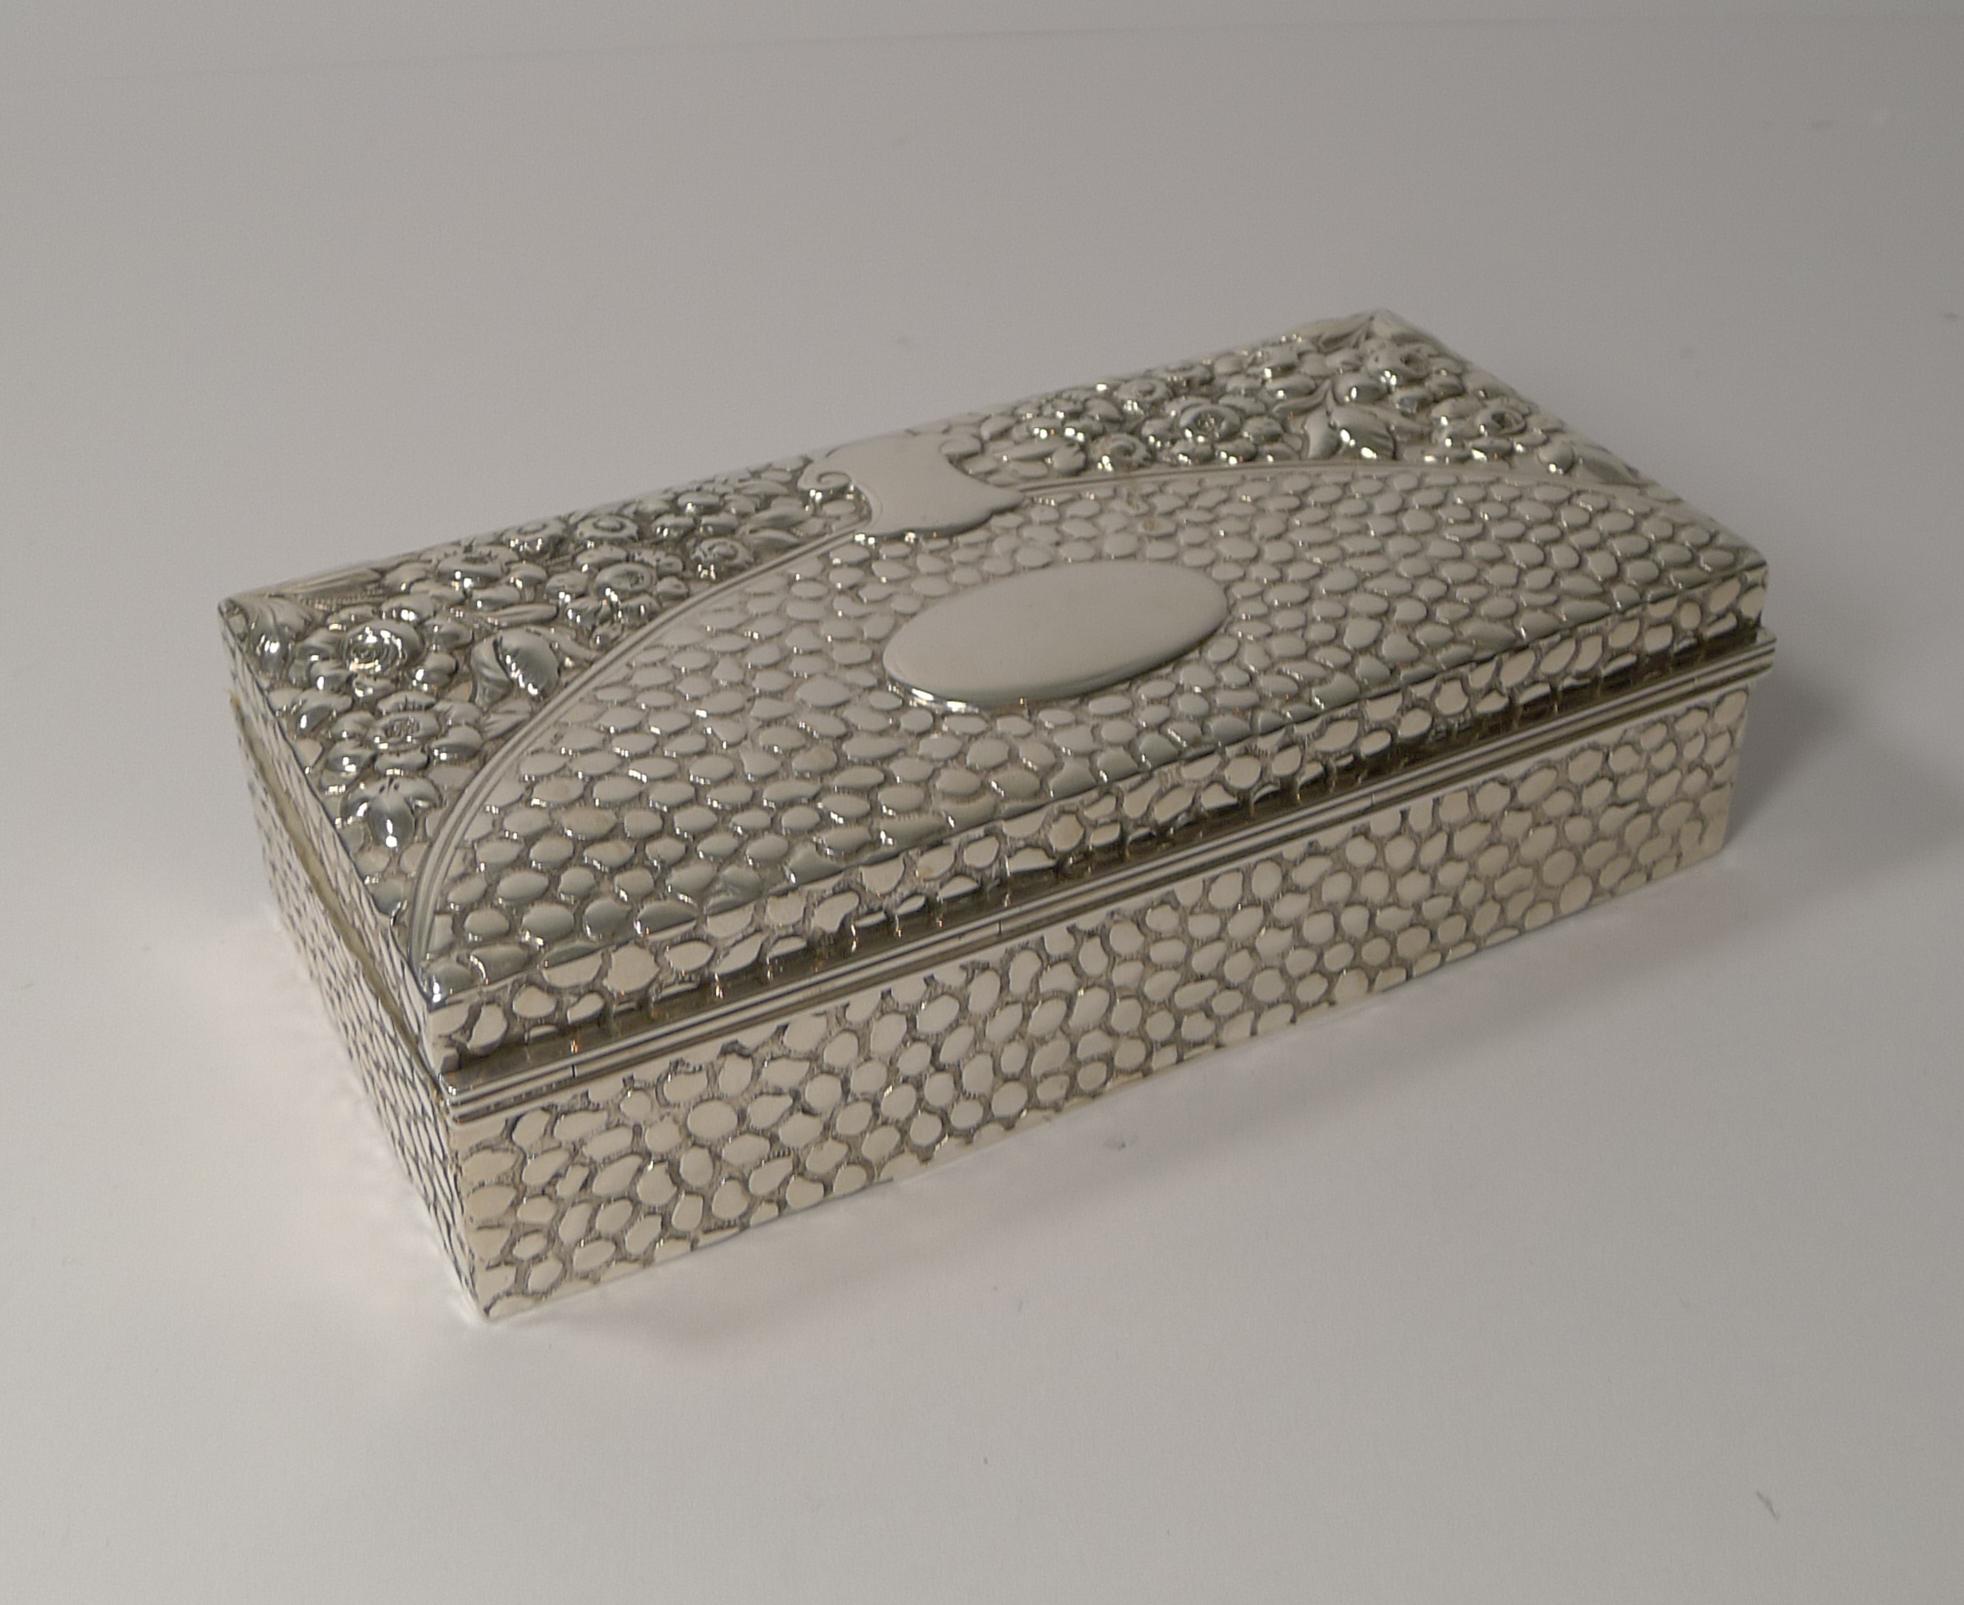 Albanian Antique English Sterling Silver Jewelry Box, 1893